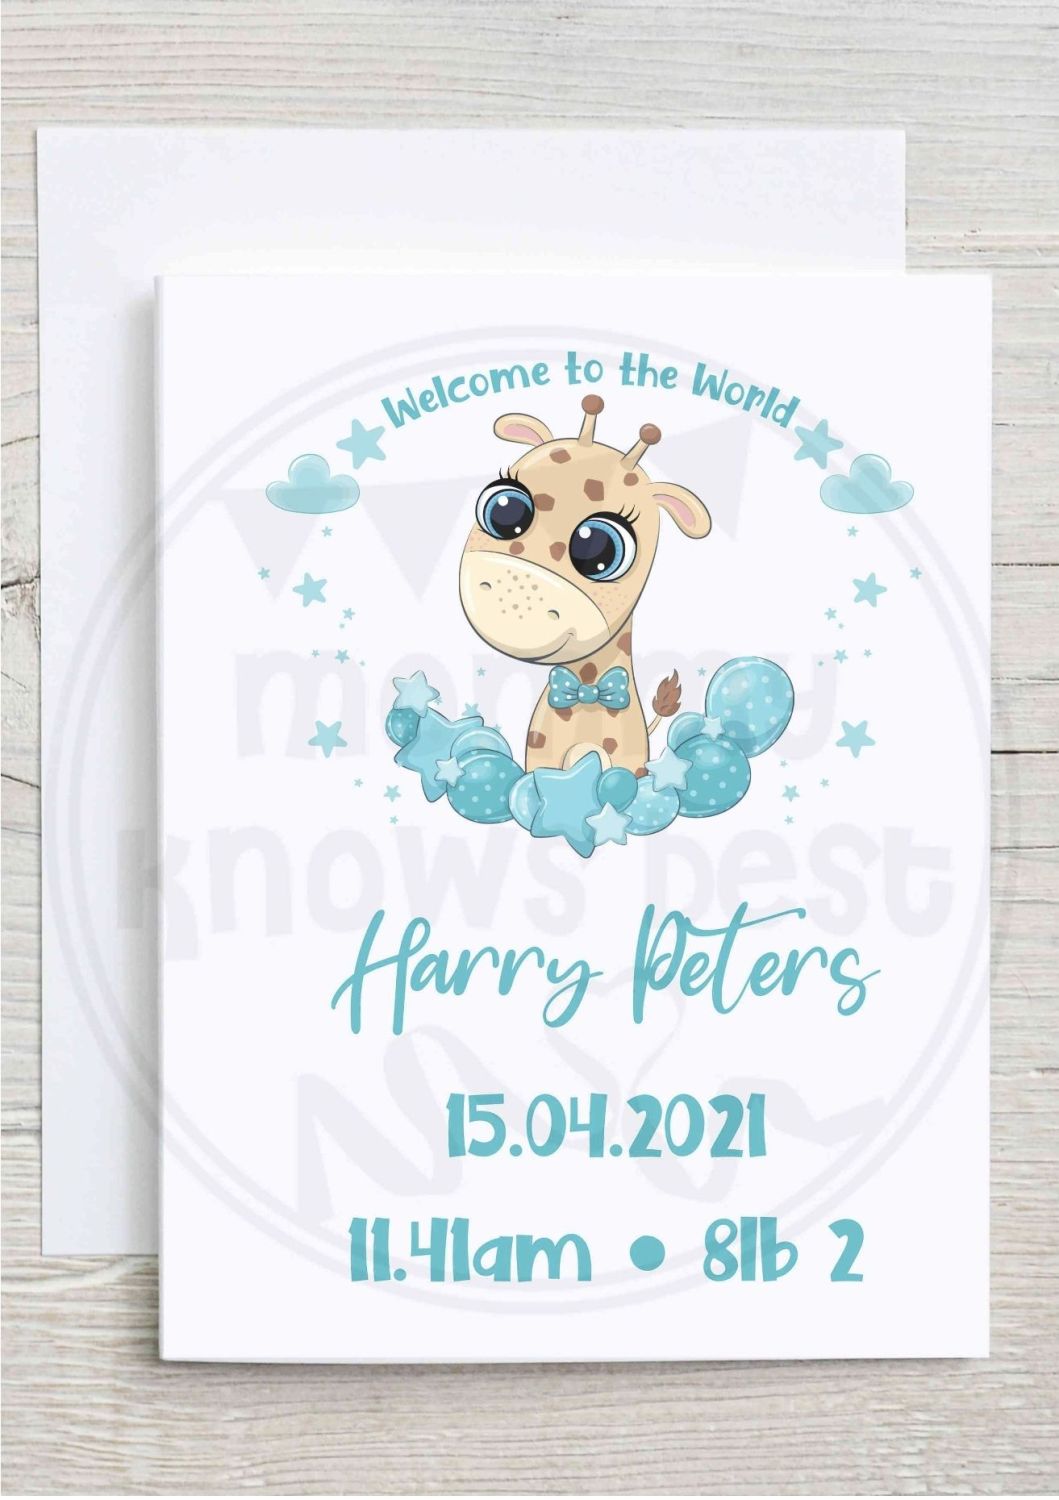 New born baby greetings card - personalised with name, date and weight. Pin